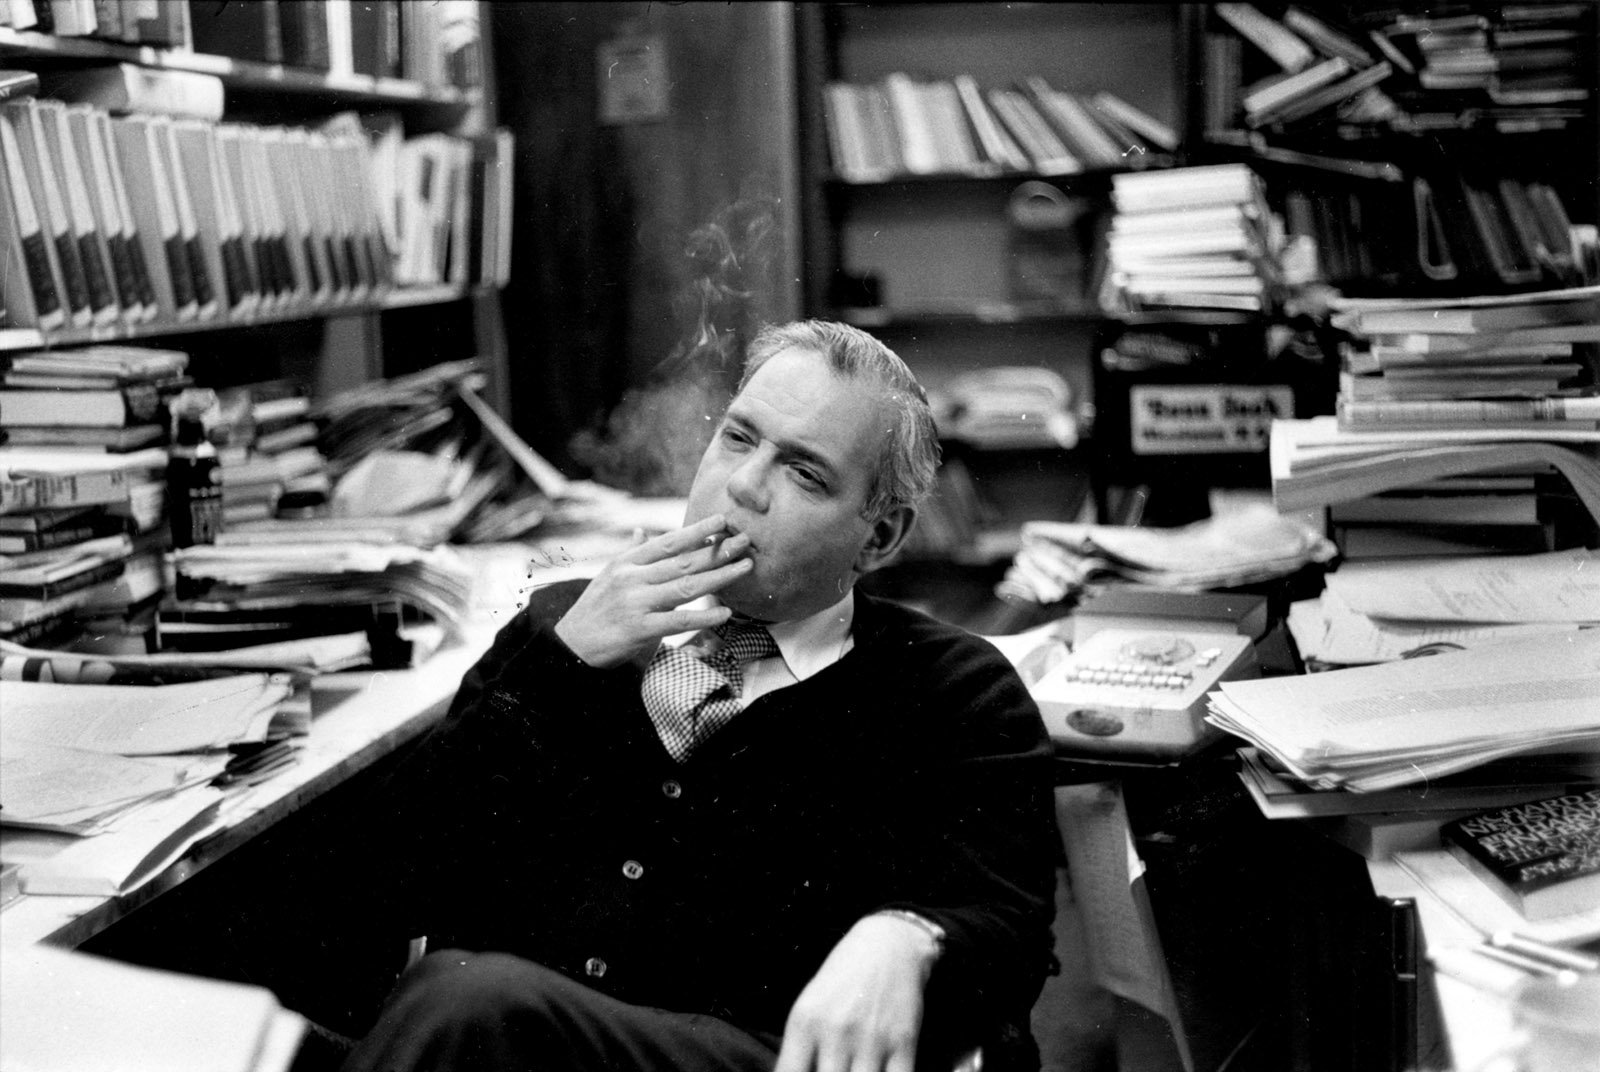 Robert B. Silvers in his office at The New York Review of Books, early 1980s